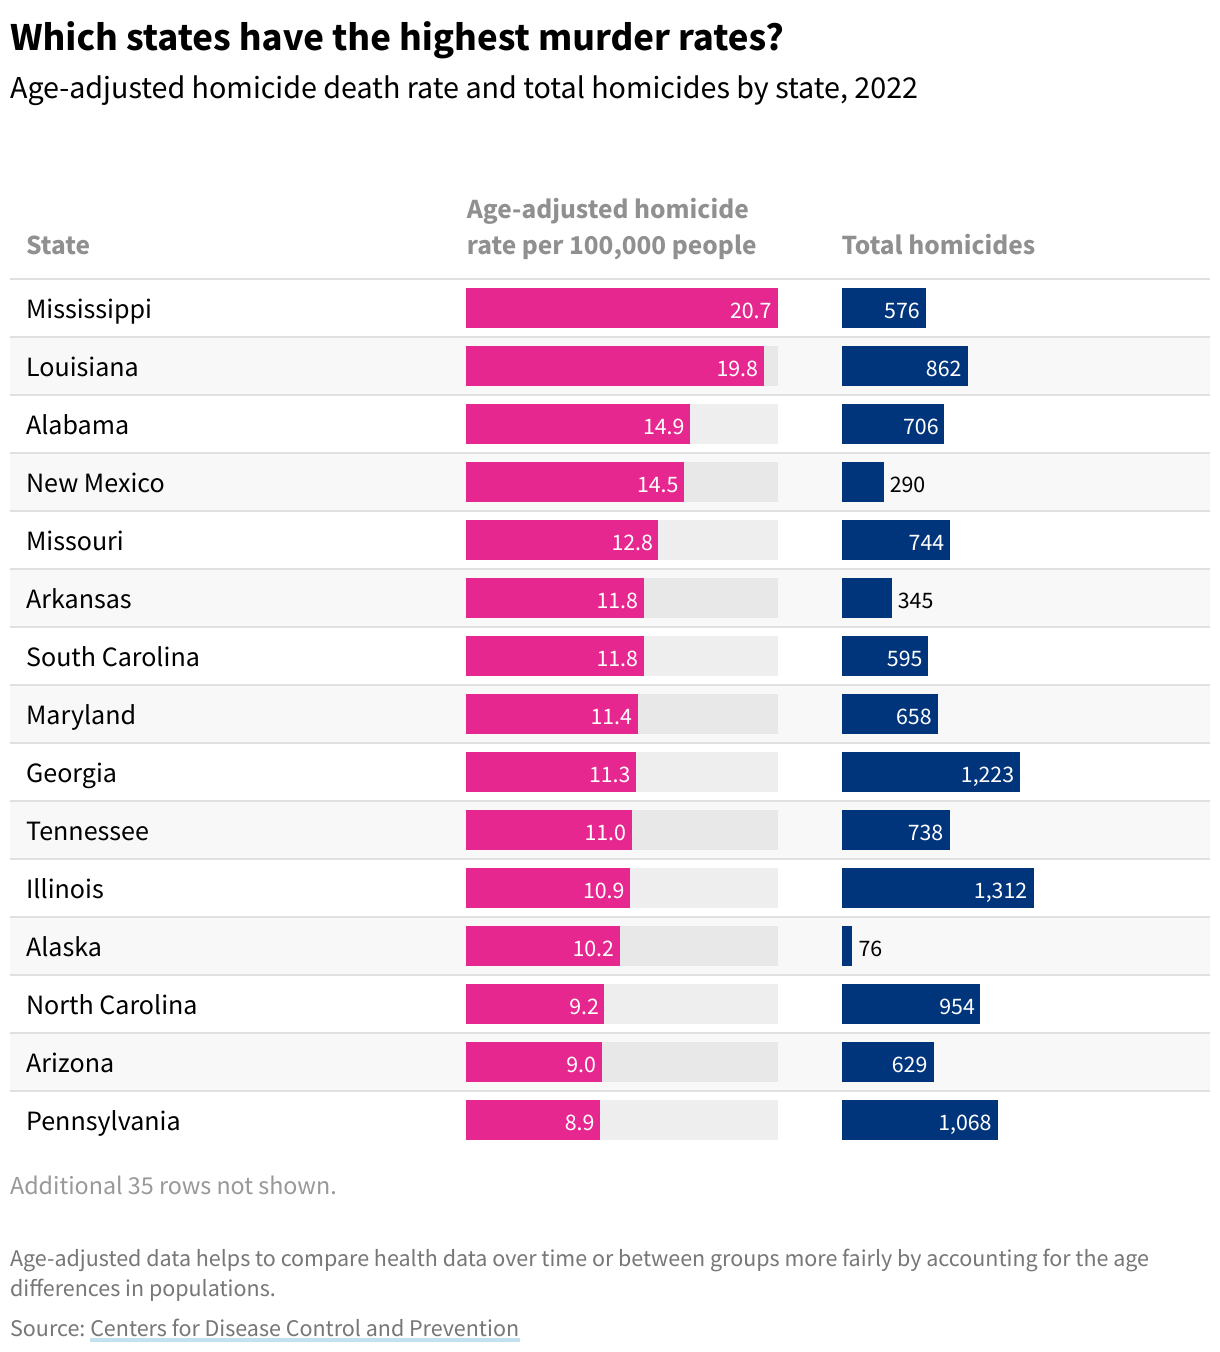 Table showing the age-adjusted homicide rate and total homicides in all 50 US states in 2021.